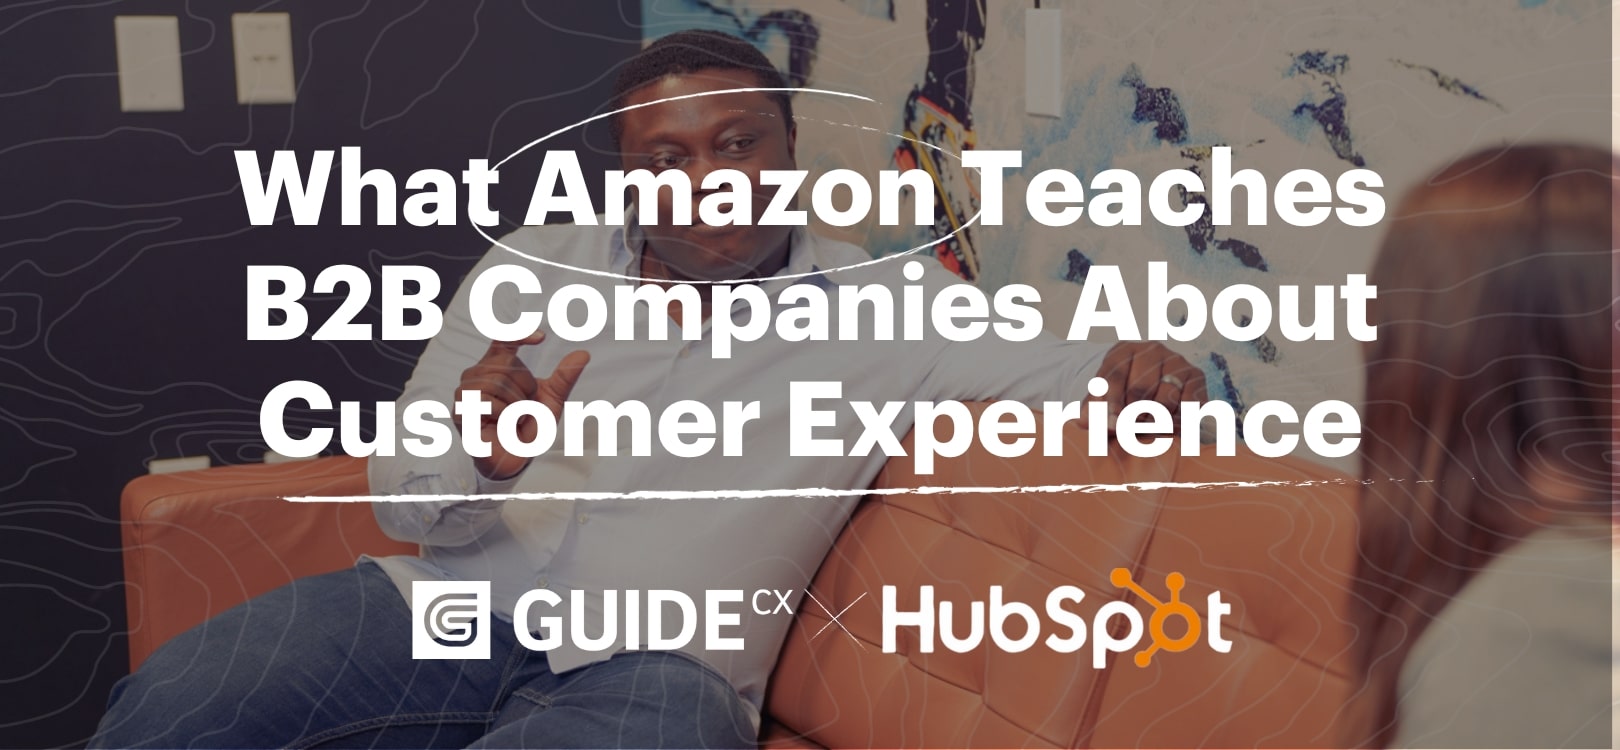 What Amazon B2B Companies About Customer Experience